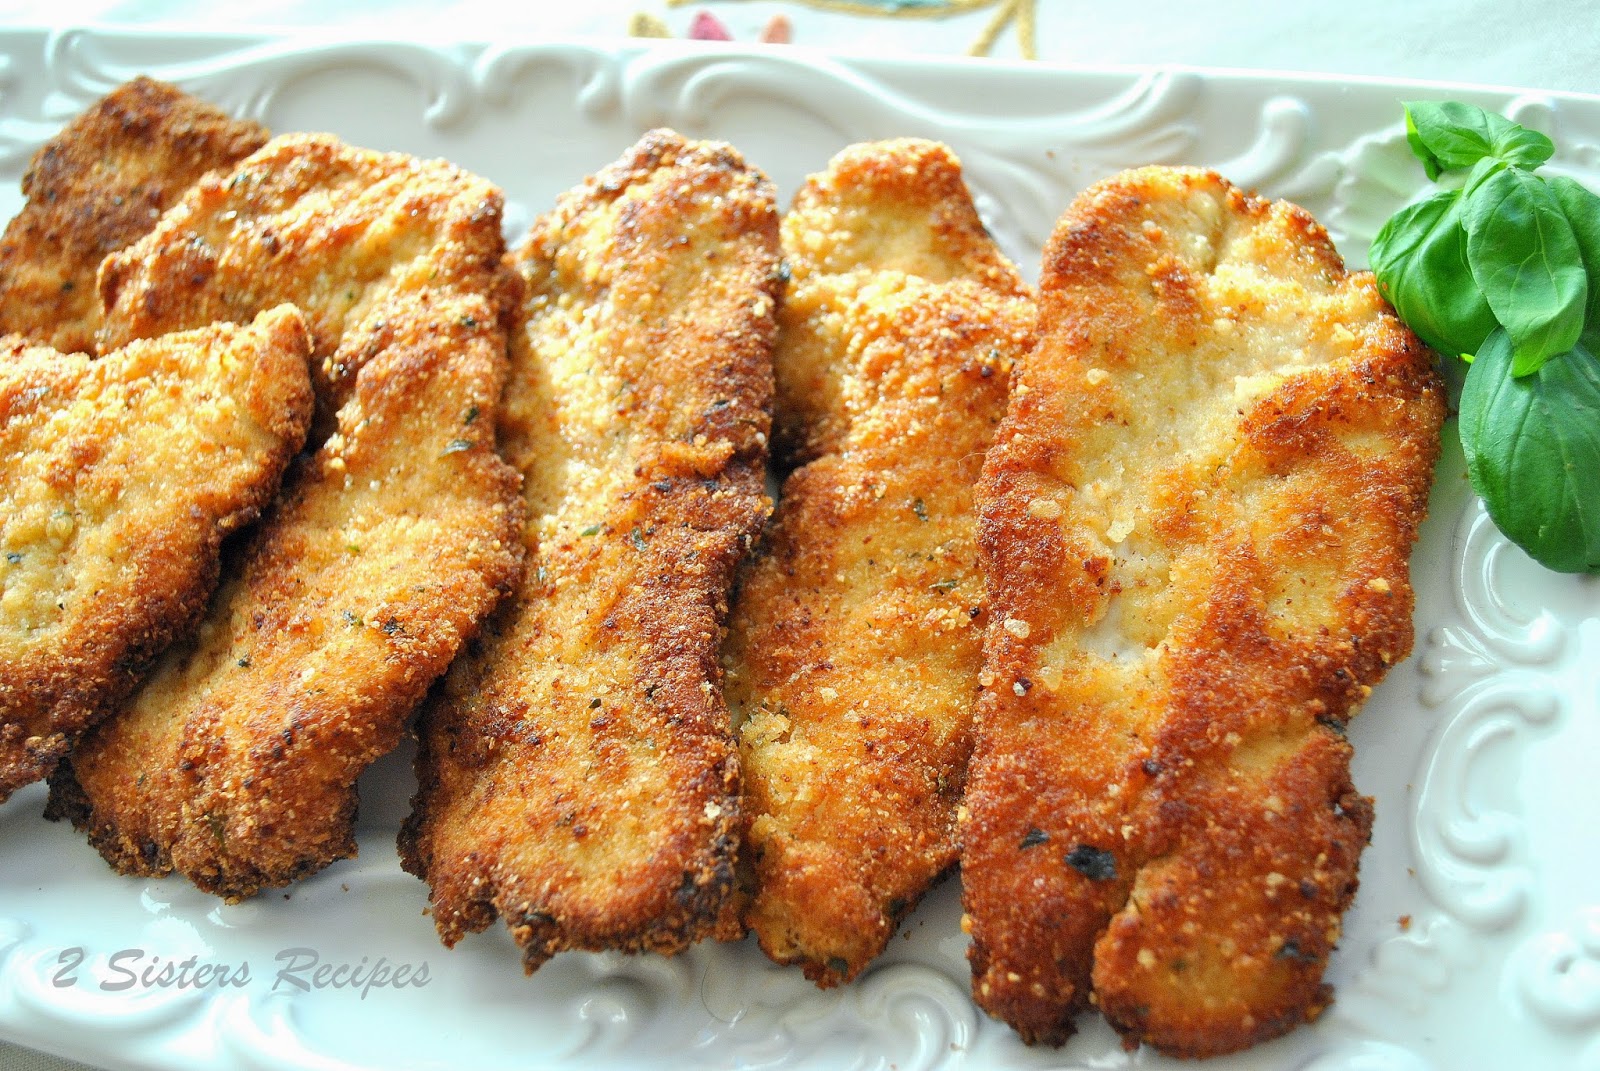 5 golden brown cooked cutlets on a white platter.